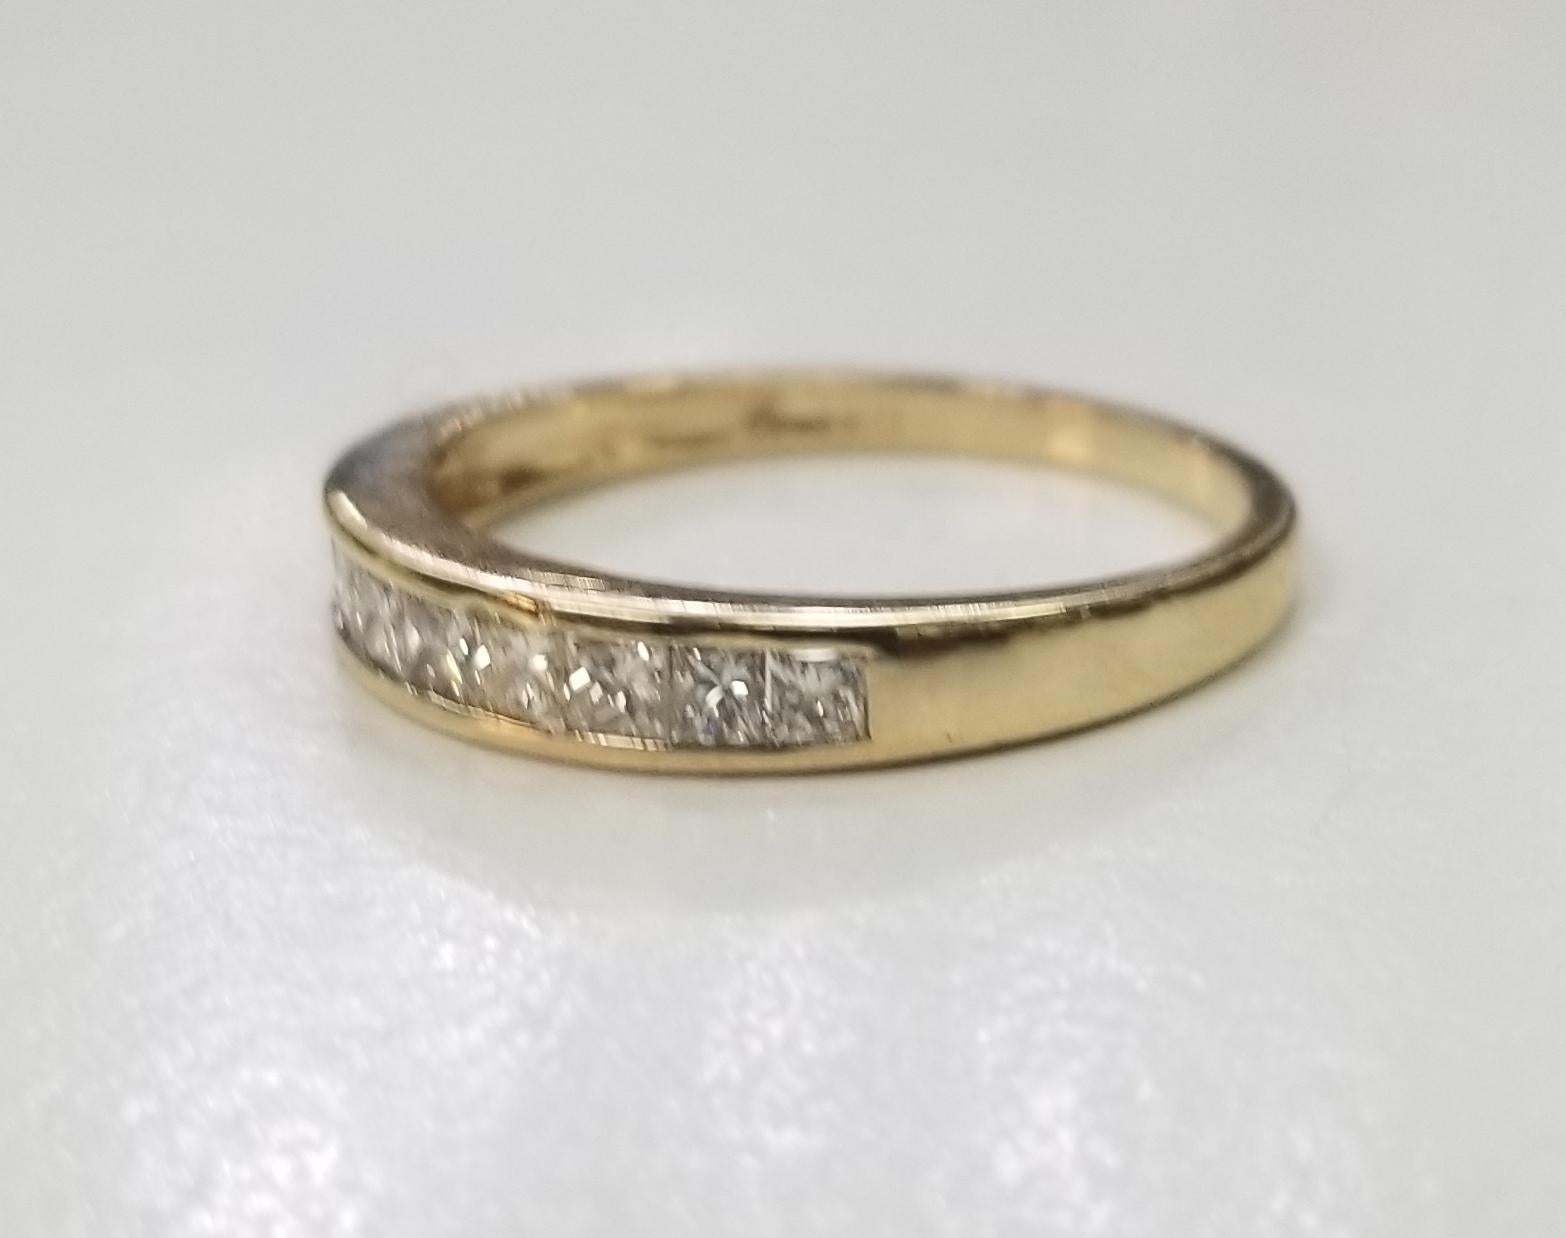 14k yellow gold diamond princess cut wedding ring, 
Specifications:
    main stone: DIAMOND   
    diamonds: 10 PCS
    carat total weight: 0.65
    color: G
    clarity: VS2
    metal: GOLD
    type: ring
    weight: 2.1 gr
    size: 7.25 US
    